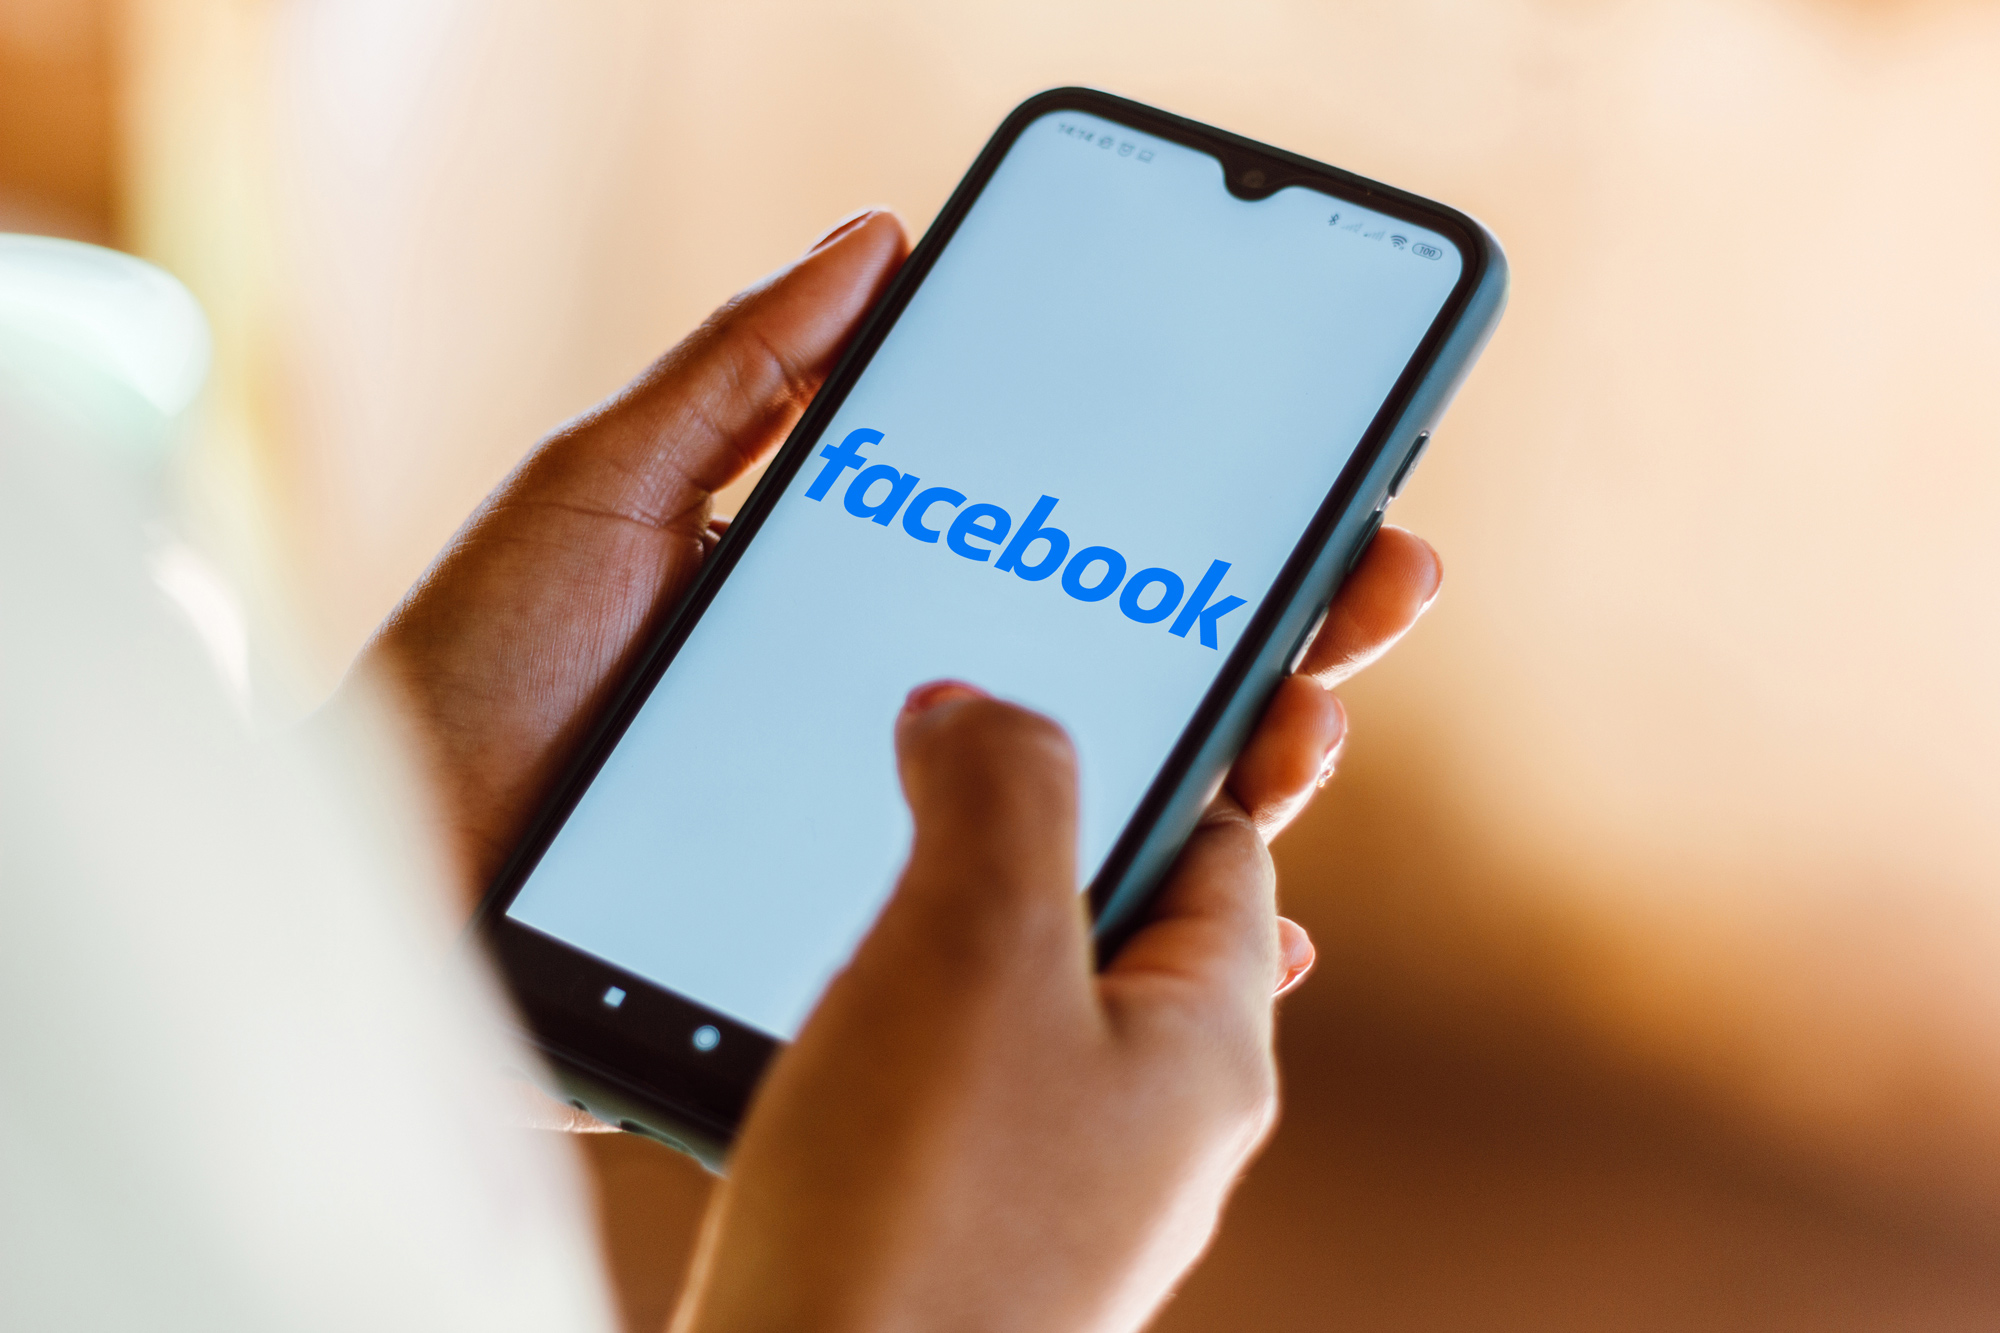 A Facebook logo is seen displayed on a smartphone on July 13.